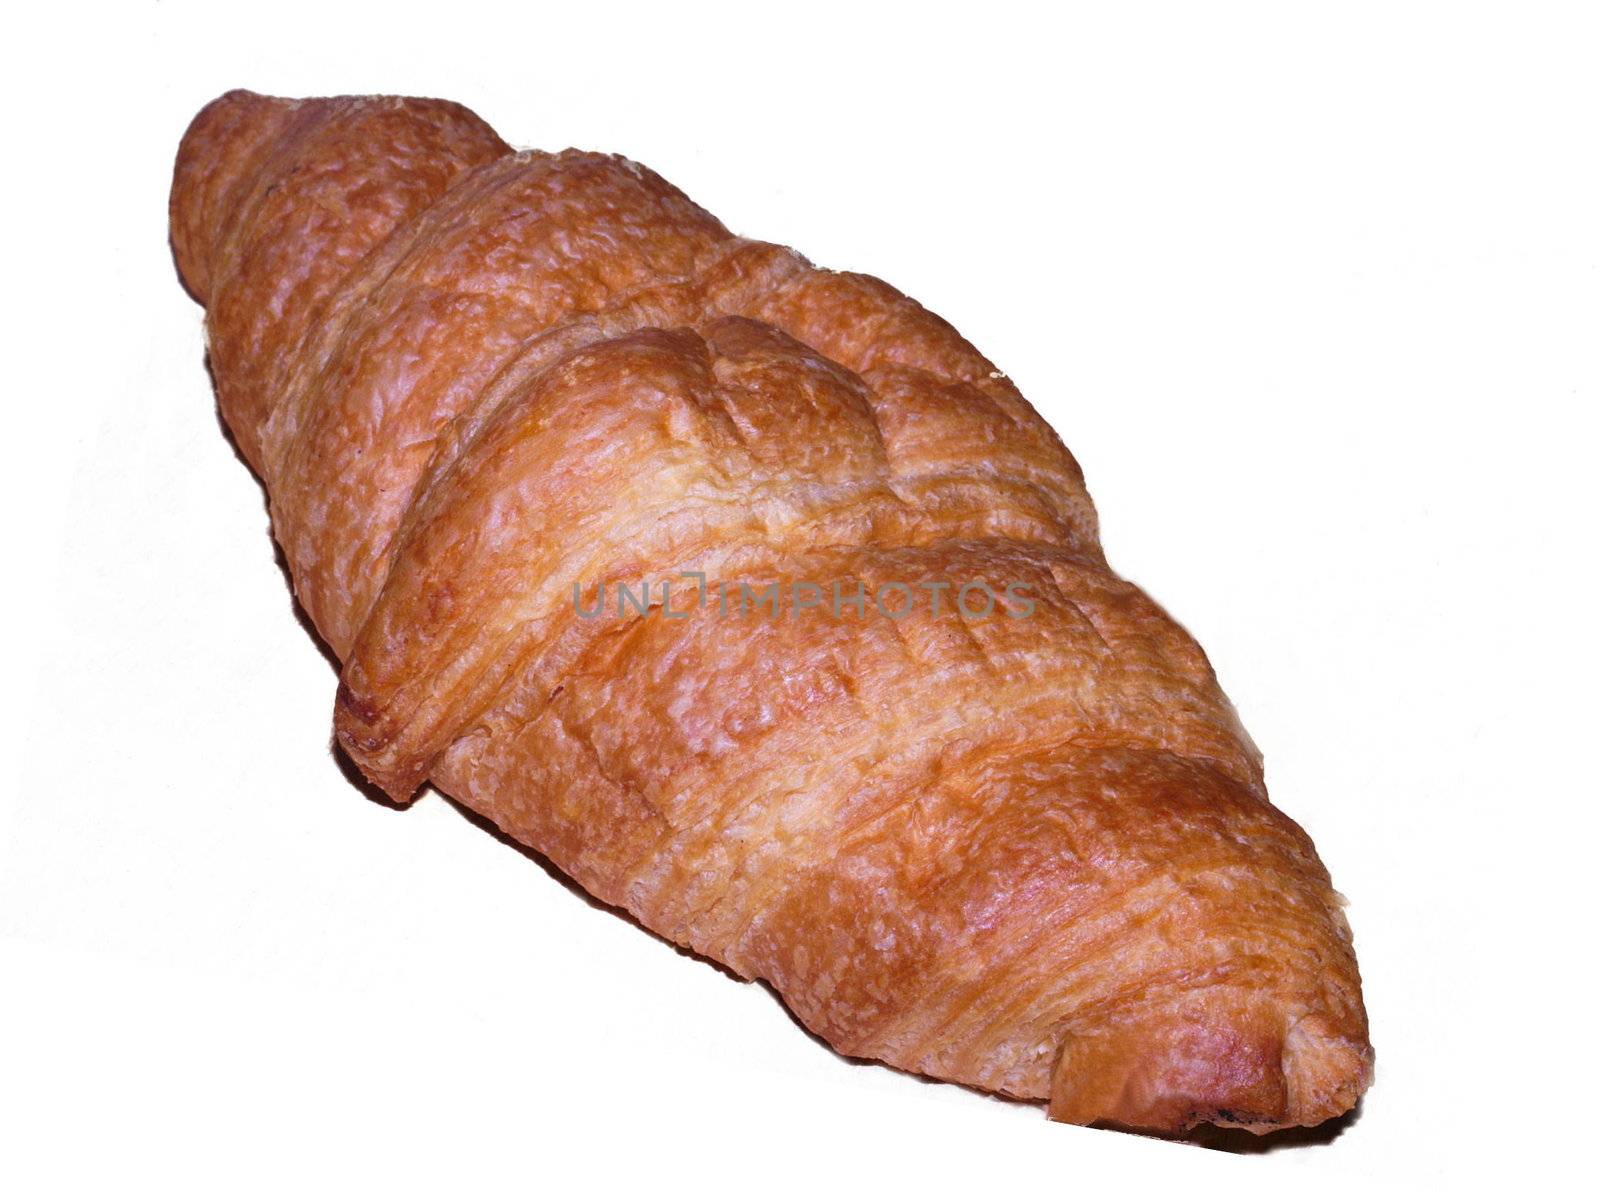 croissant by leafy